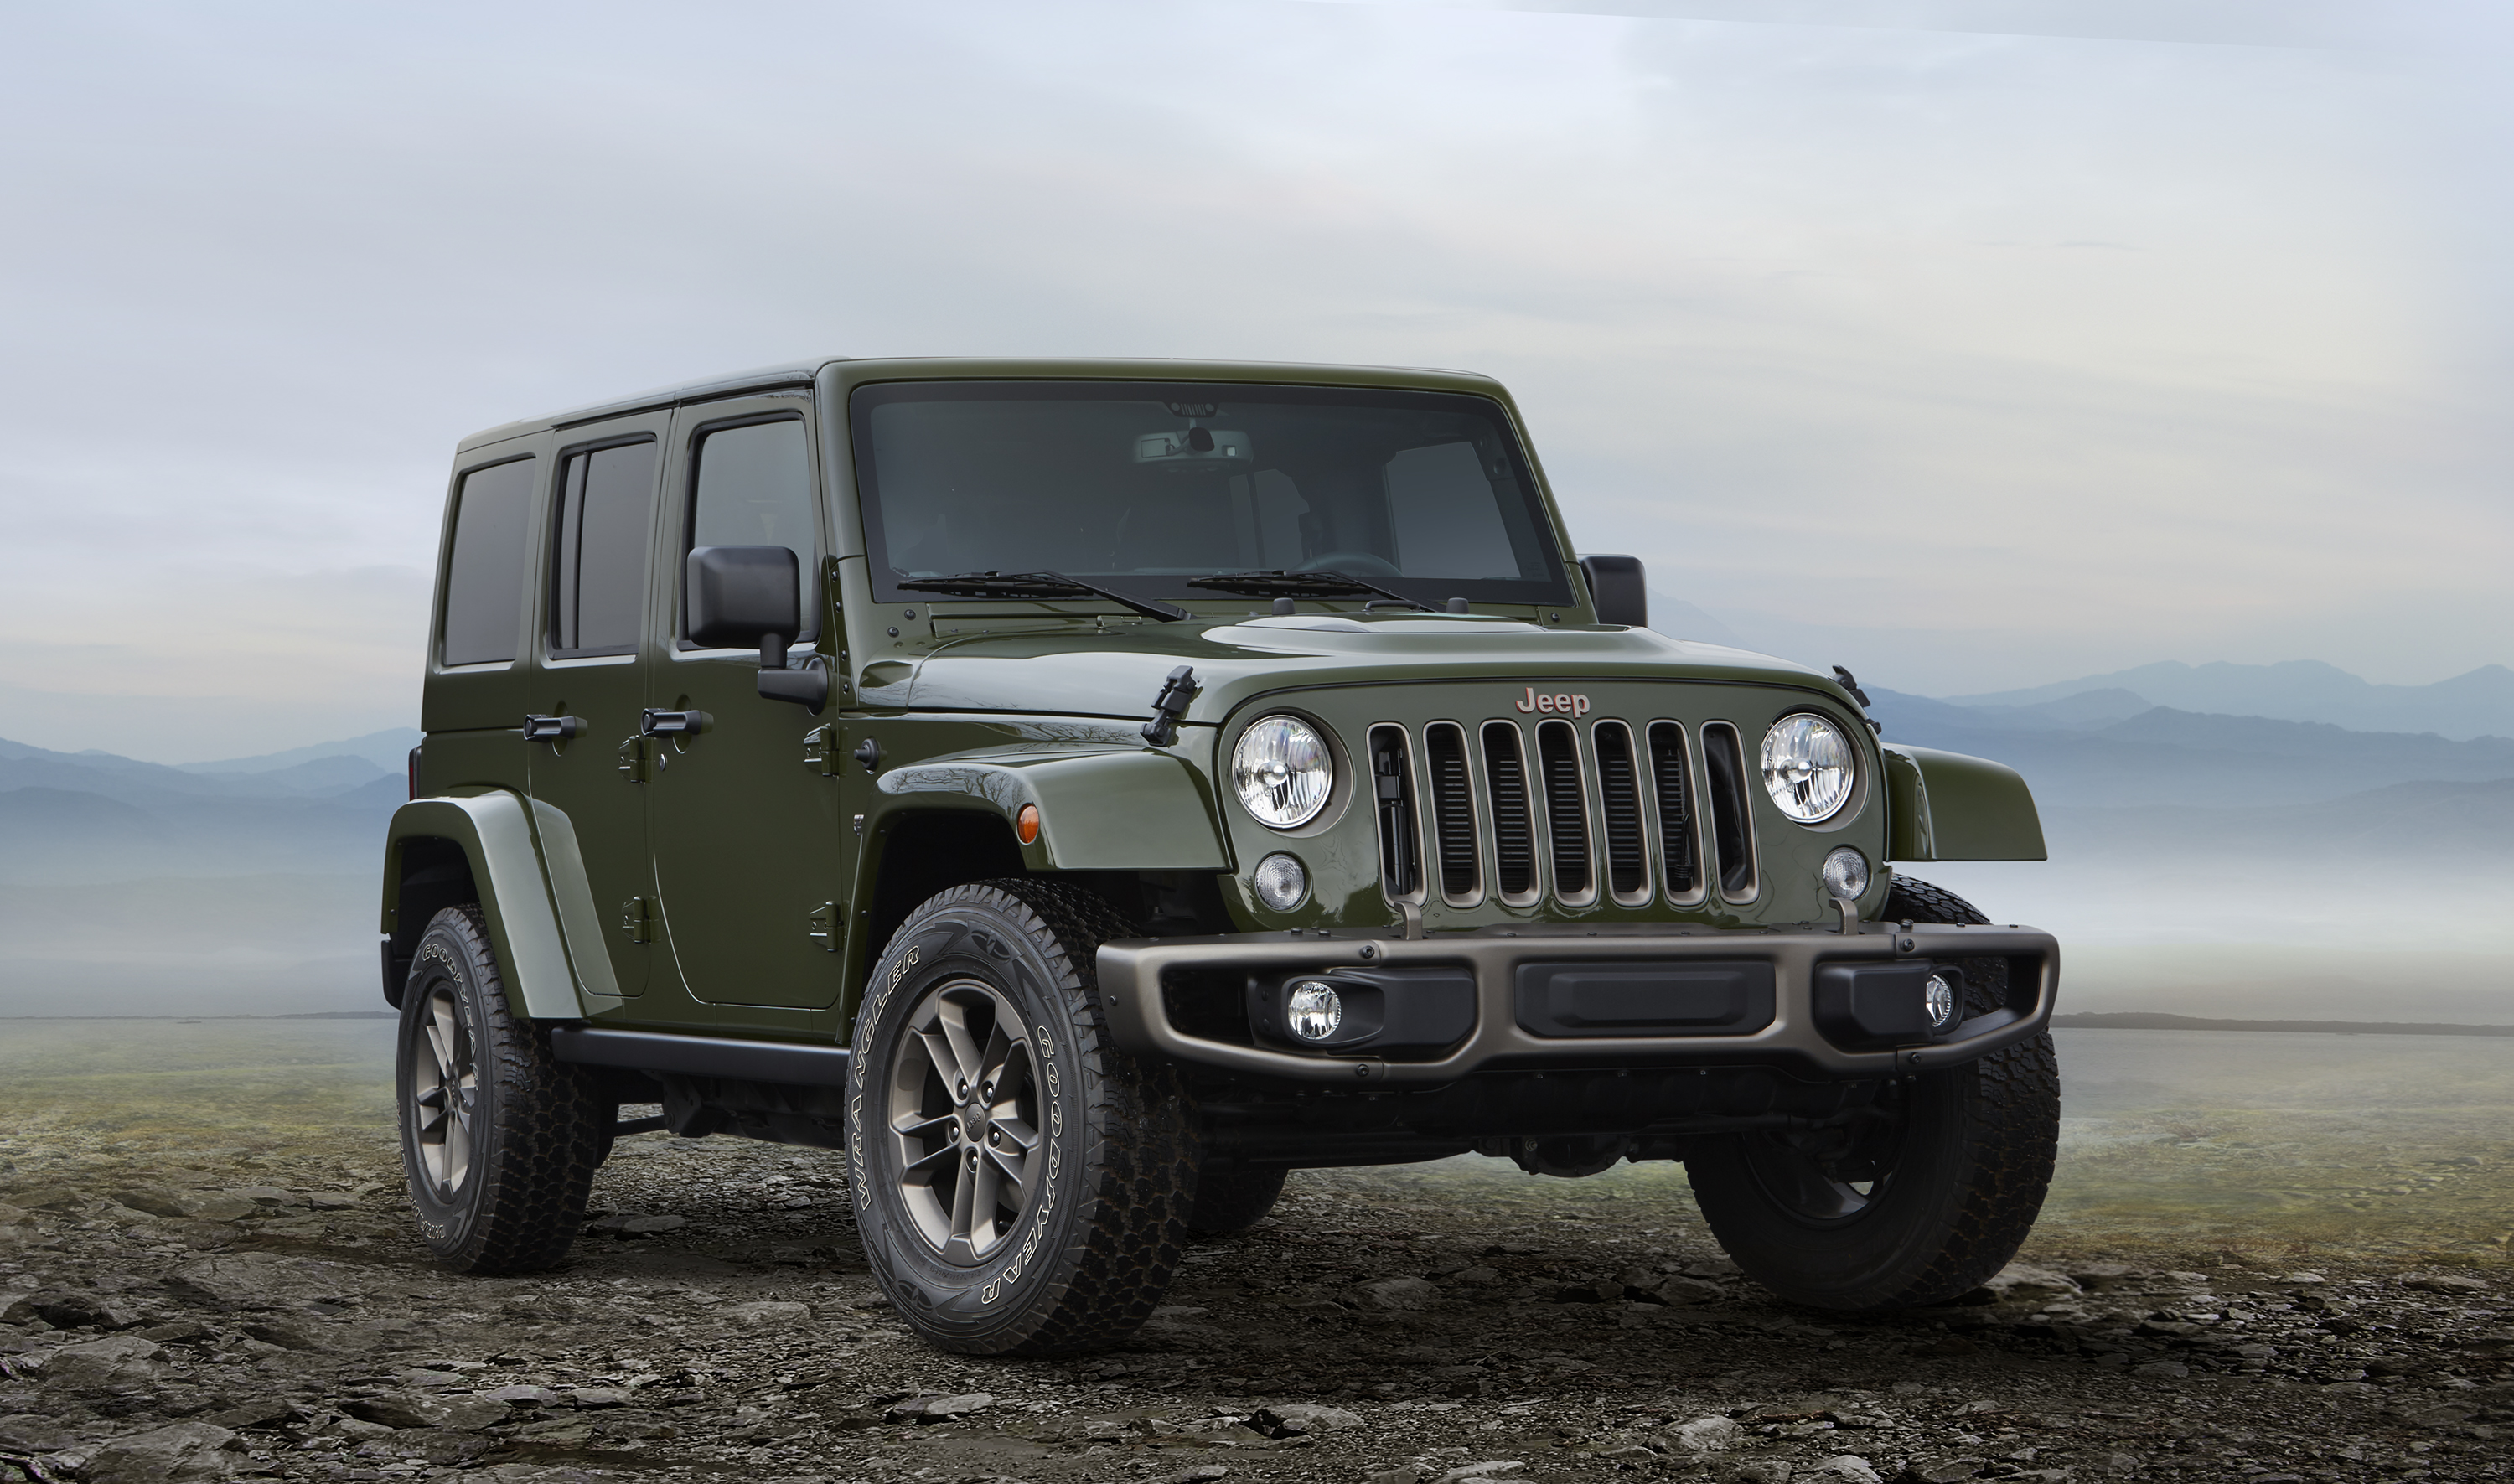 5 Reasons to Wait for the New Jeep Wrangler JKForum